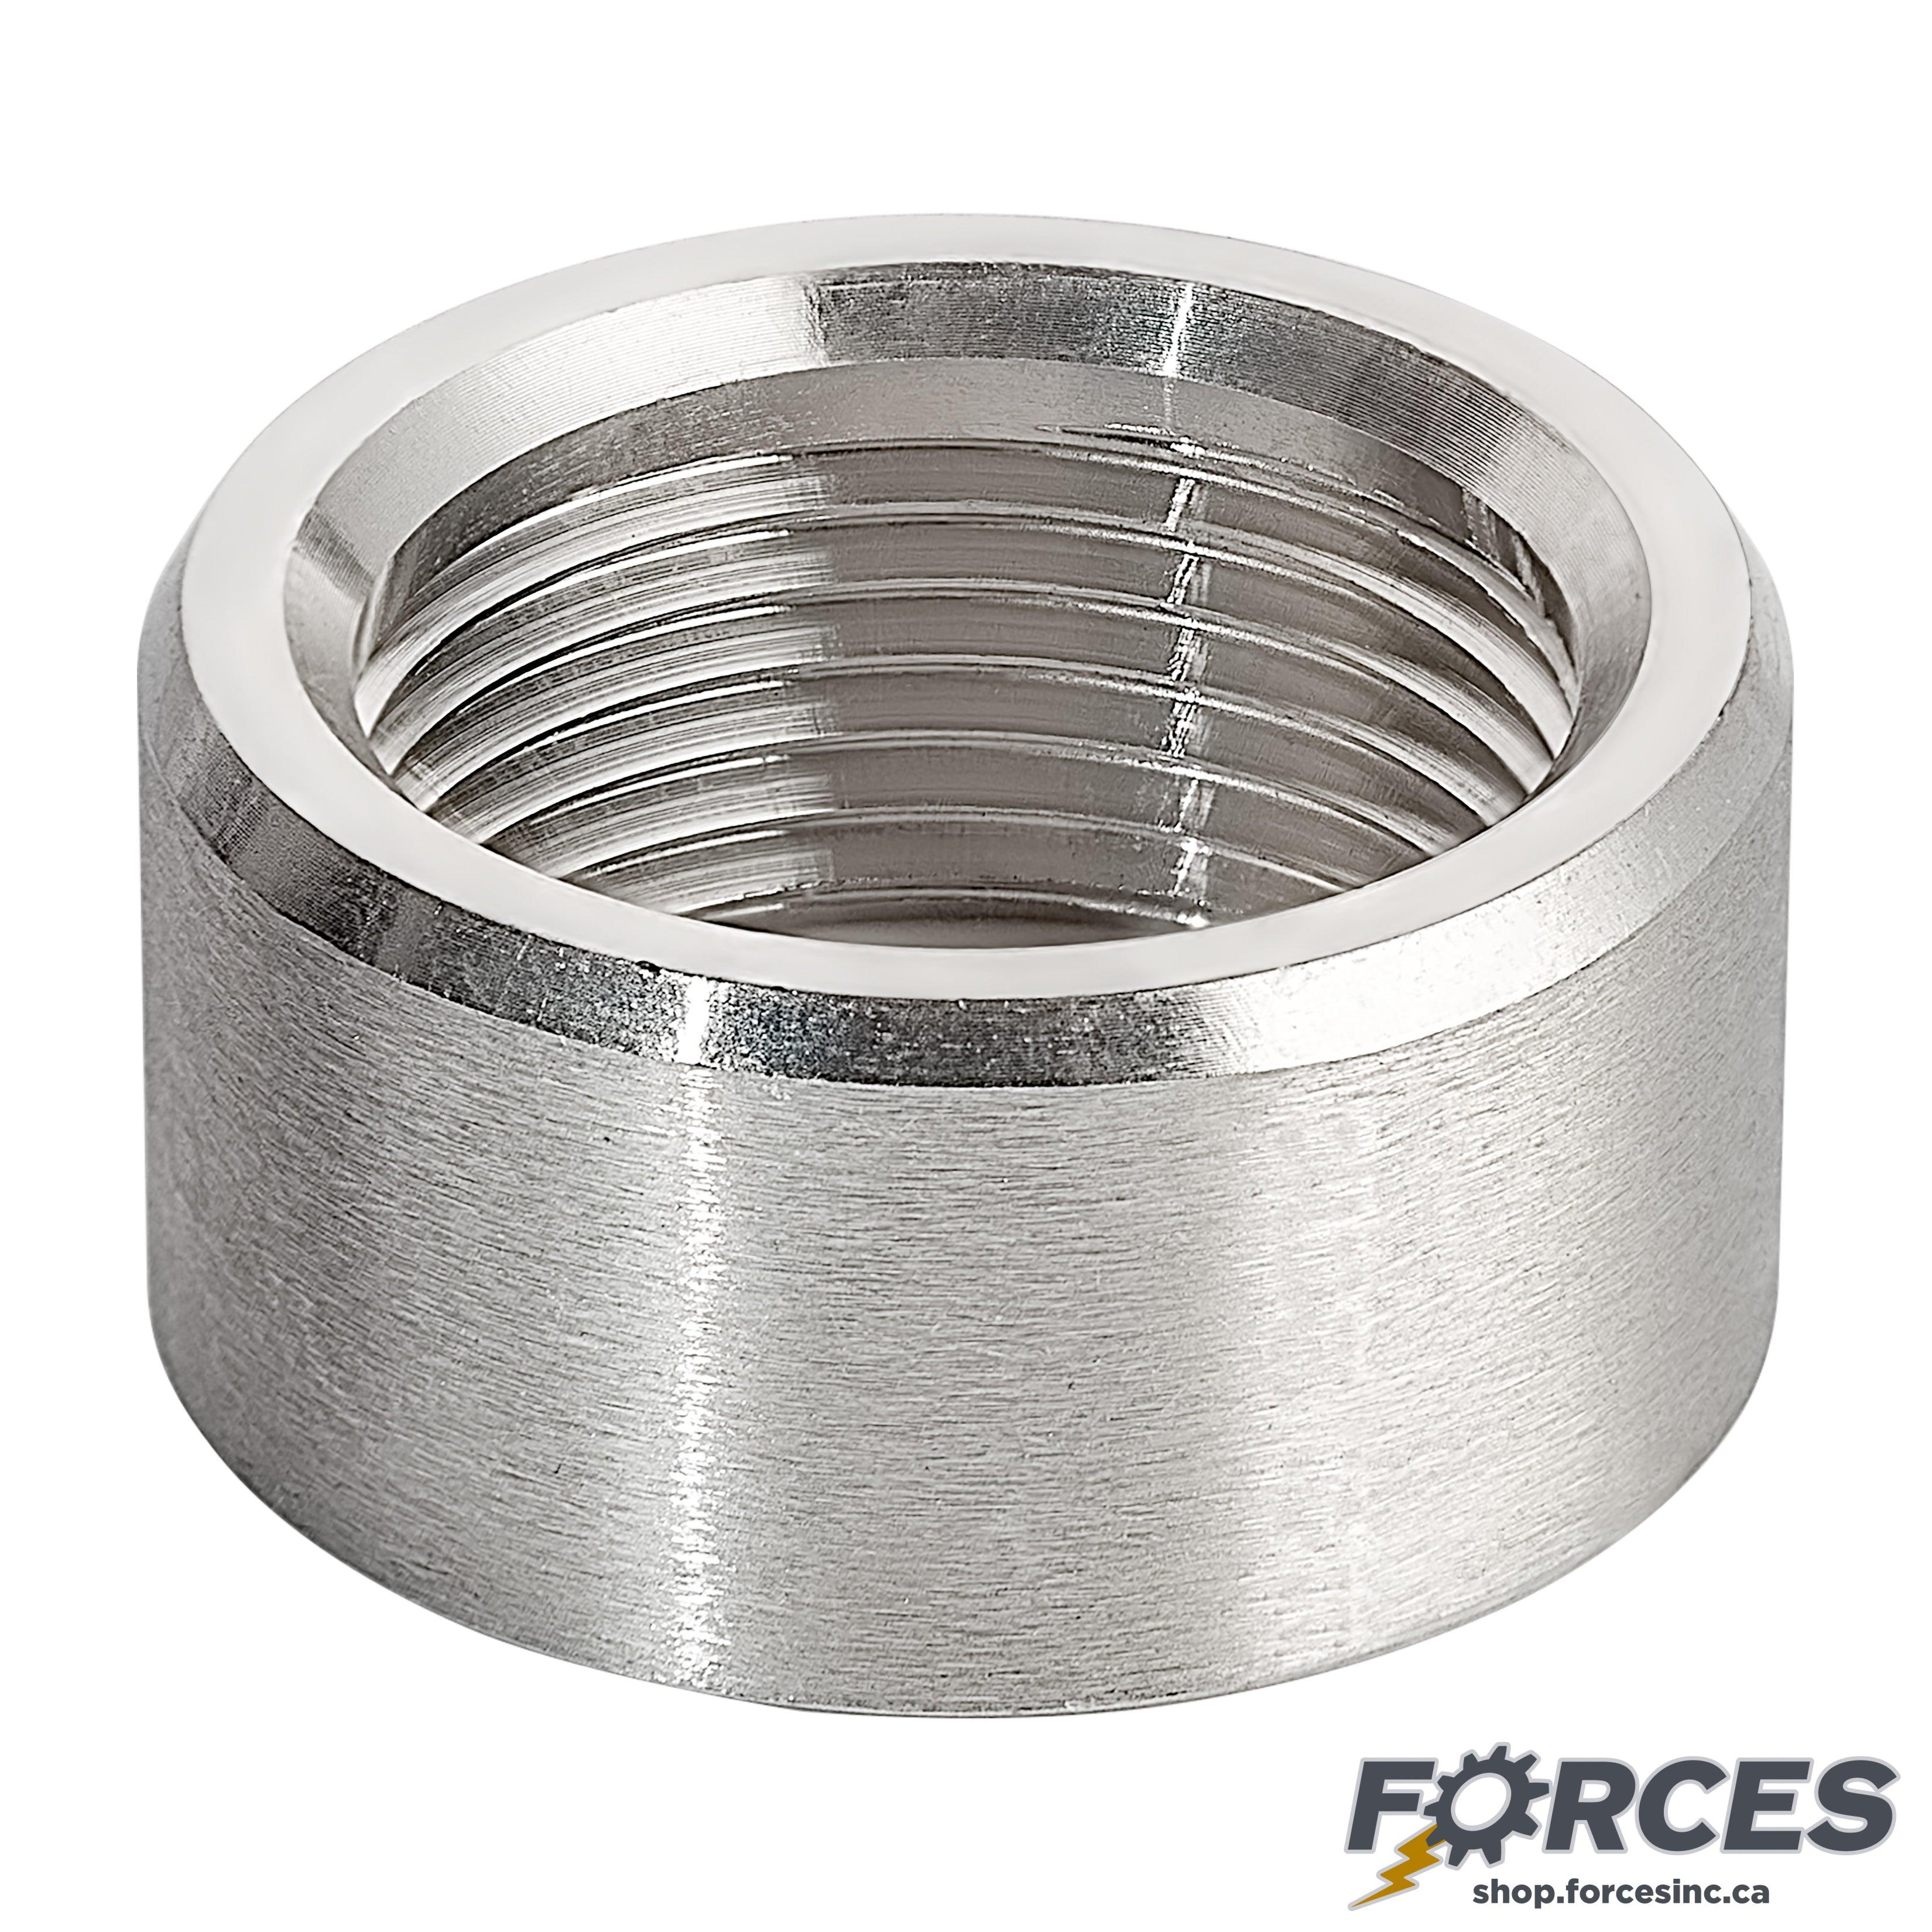 3/4" Half-Coupling NPT #150 - Stainless Steel 316 - Forces Inc